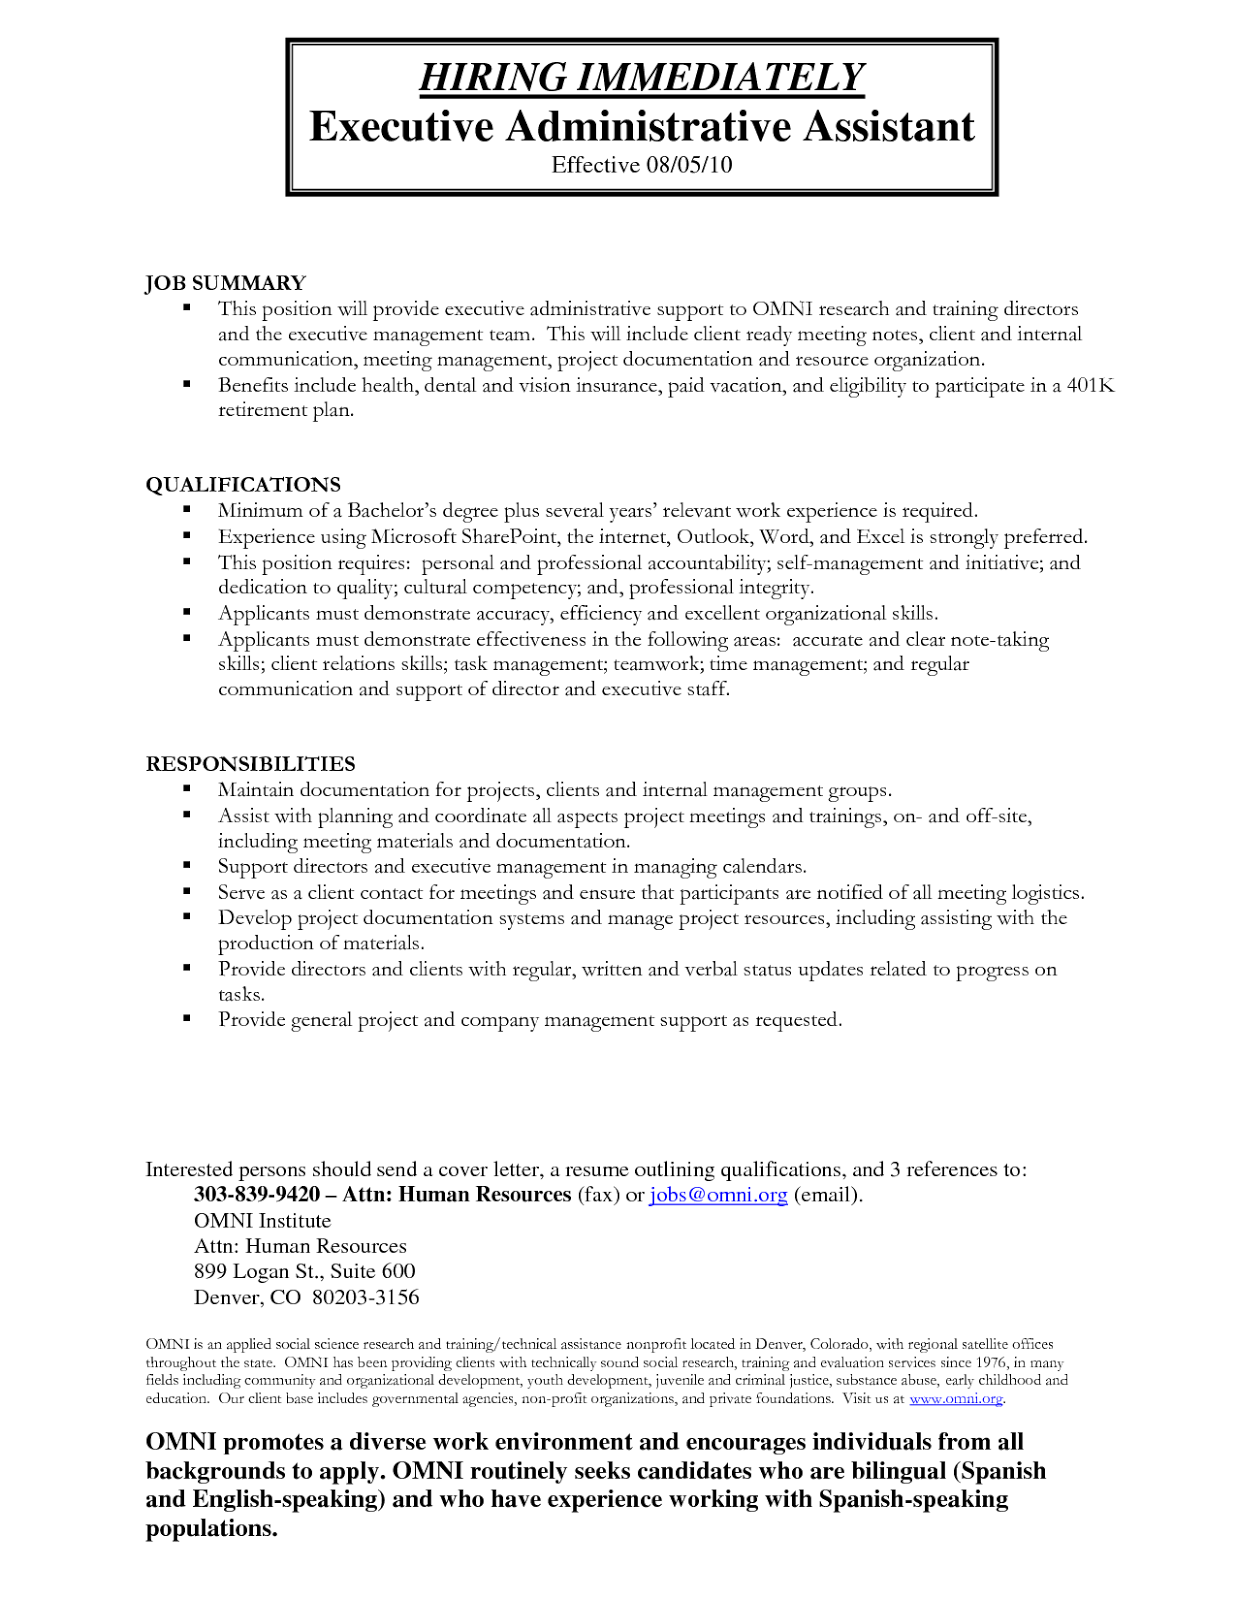 Example resume for administrative assistant